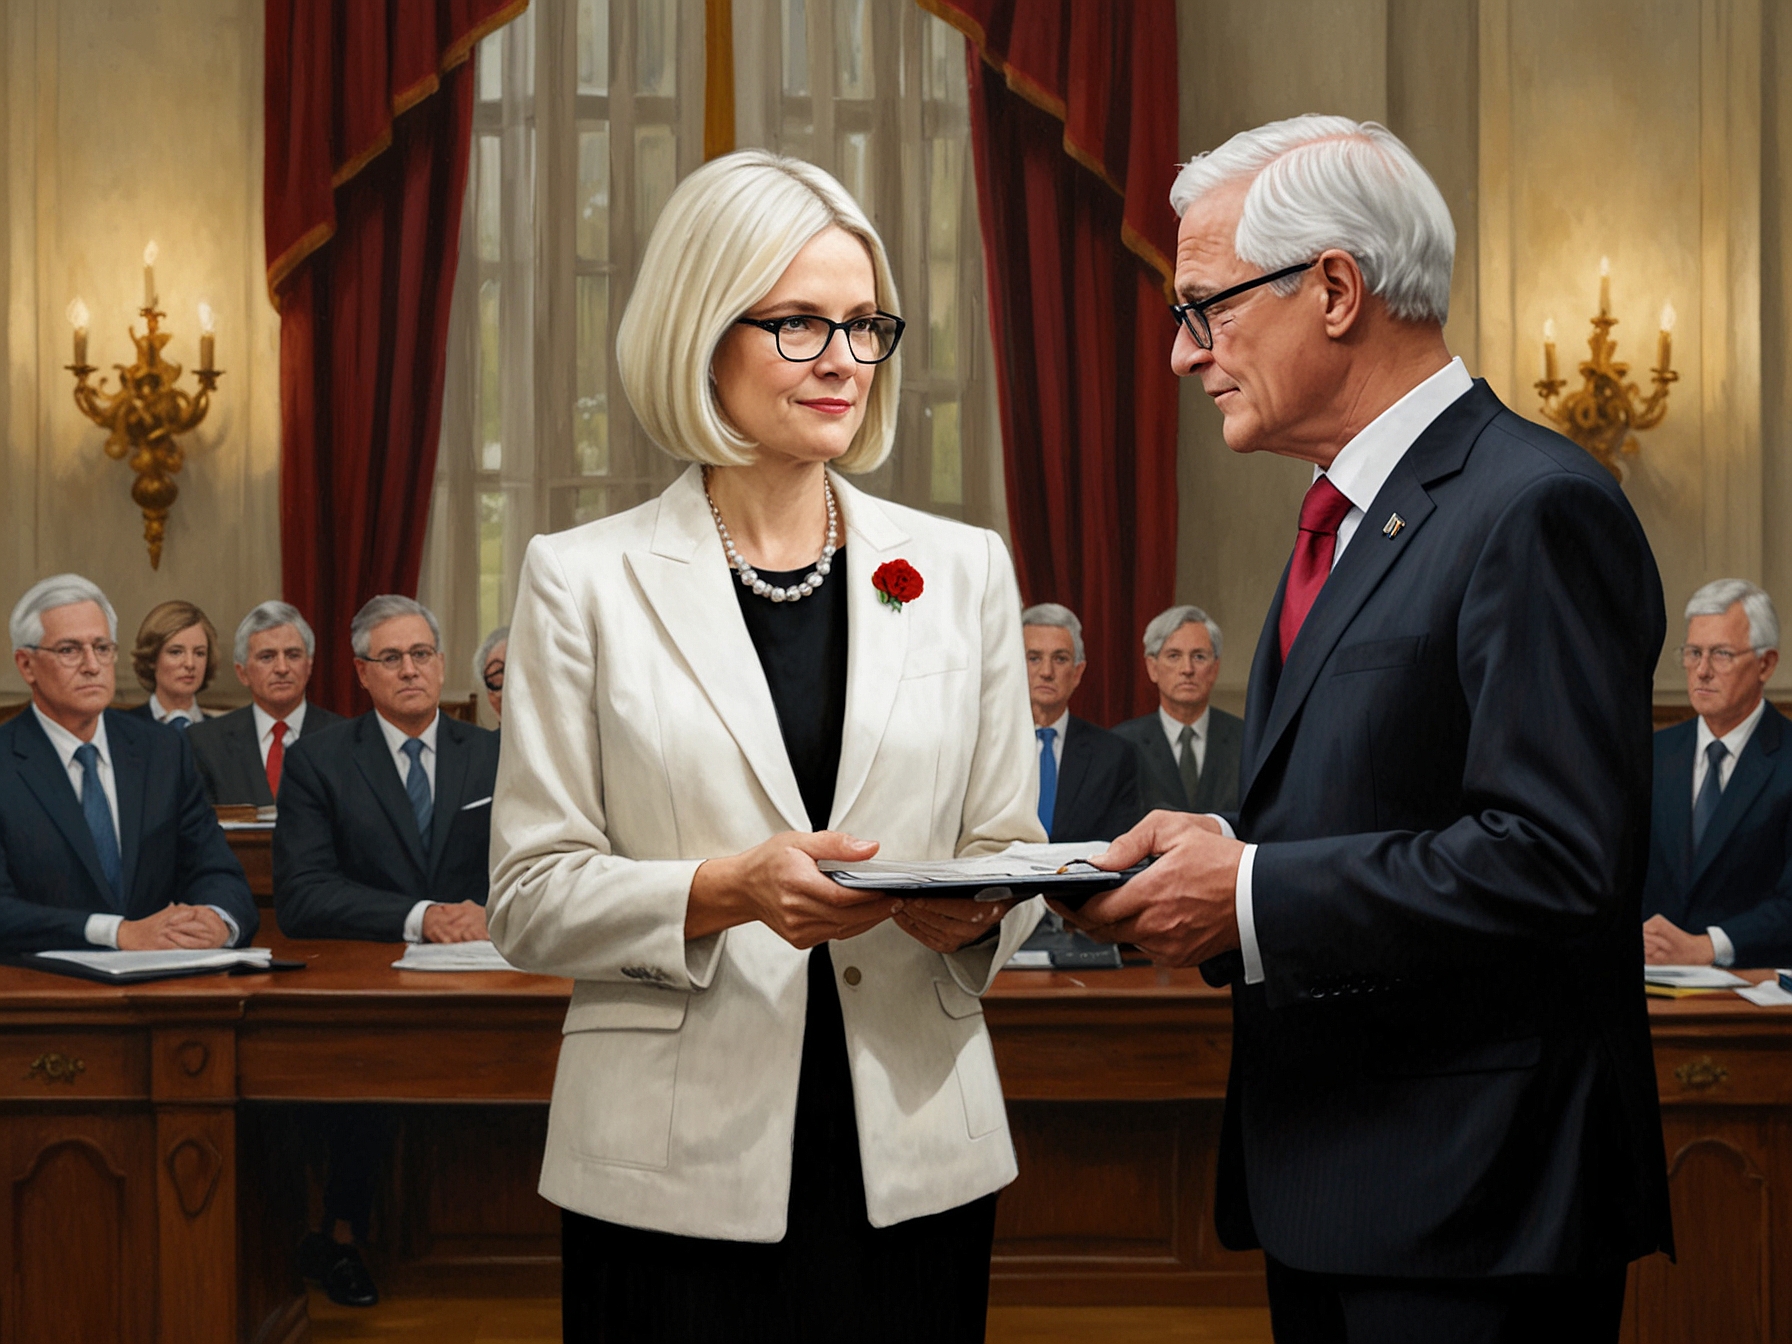 An illustration of Sam Mostyn being sworn in as the new governor general, highlighting the significance of the proposed salary increase which sets her annual remuneration to $709,017.